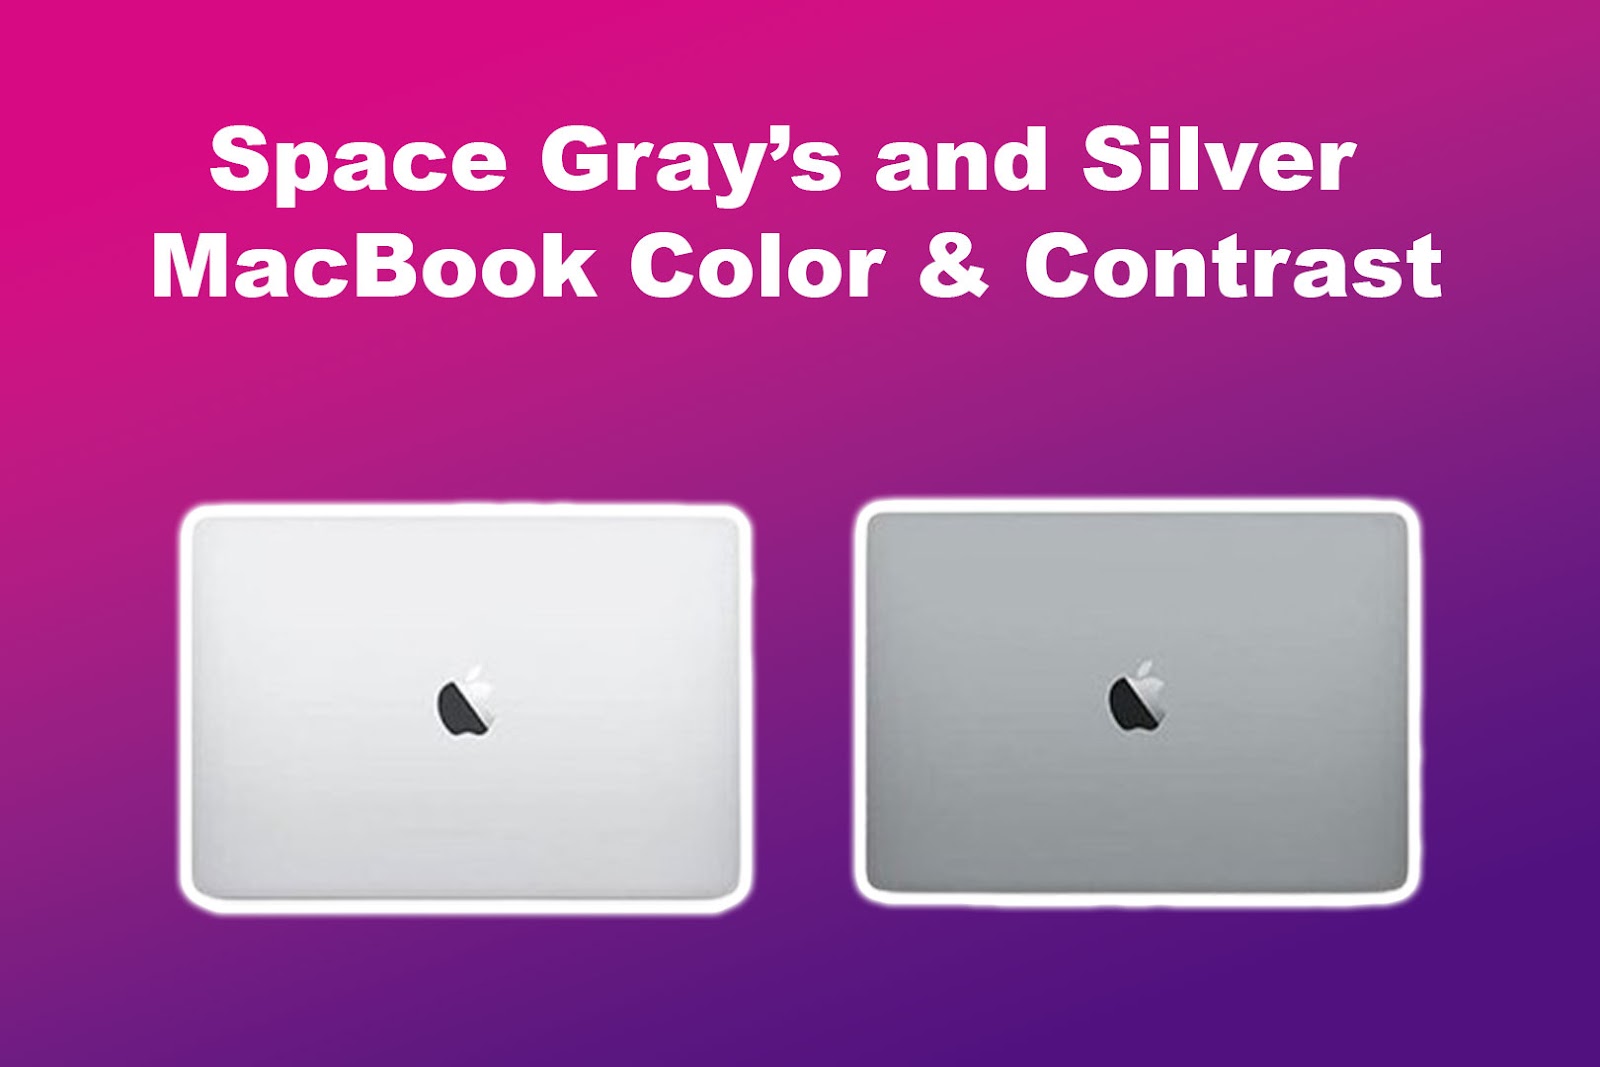 Space Gray’s and Silver MacBook Color and Contrast